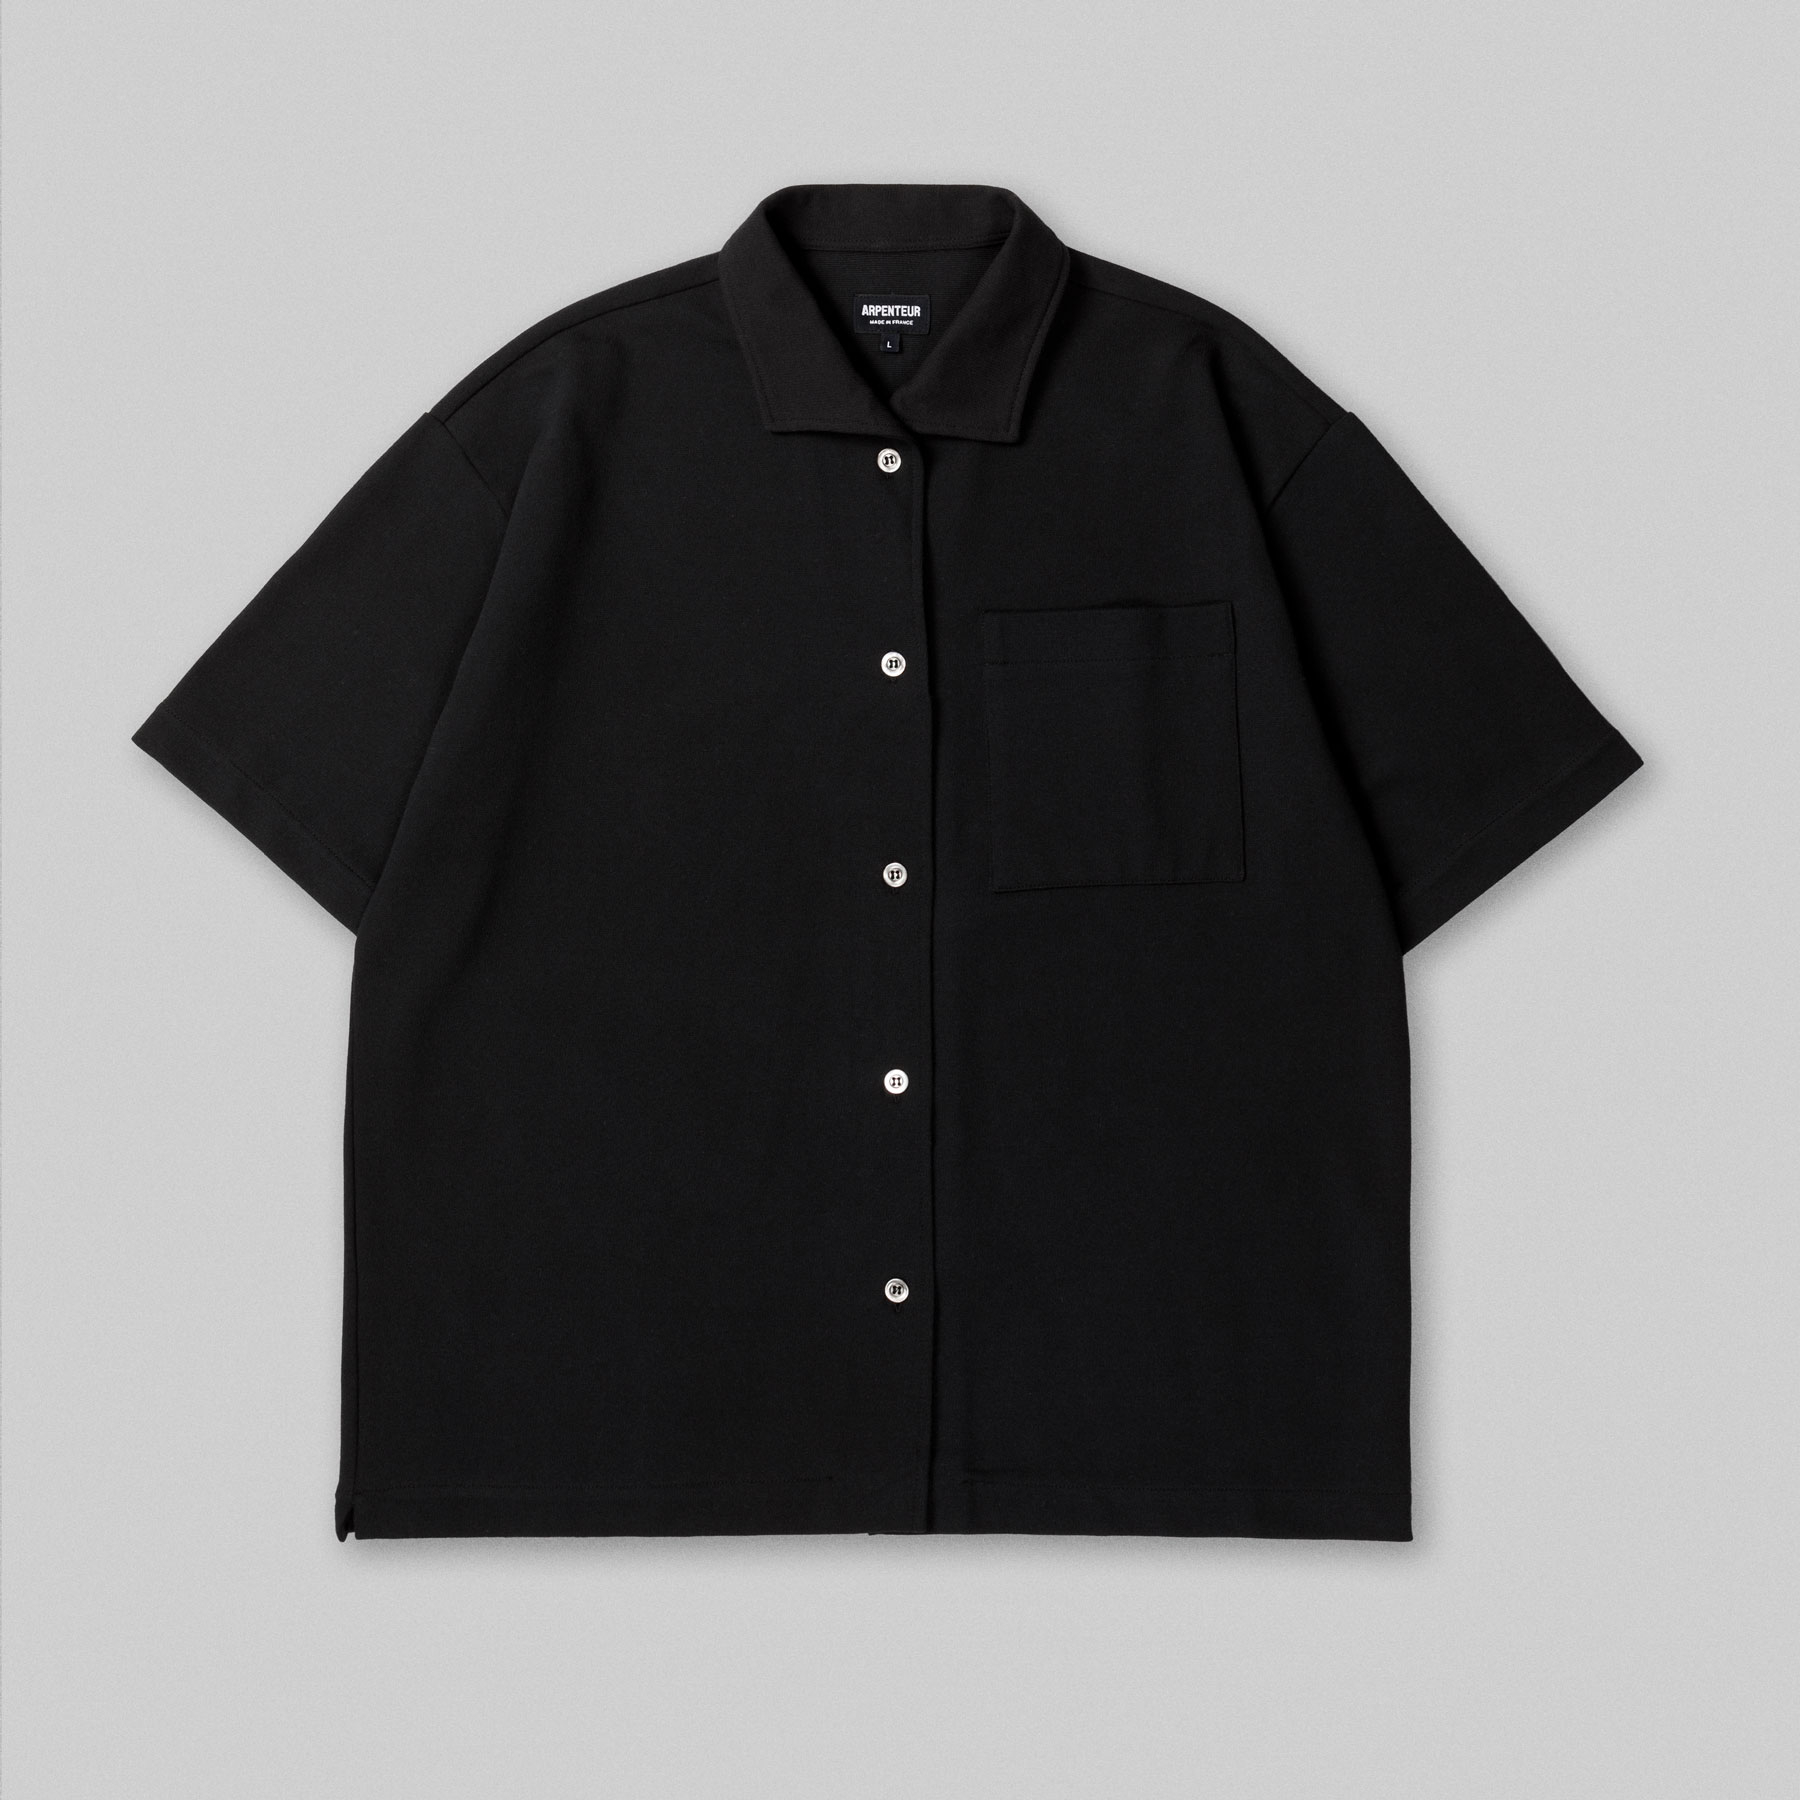 CORAL short sleeve shirt by Arpenteur in Black color